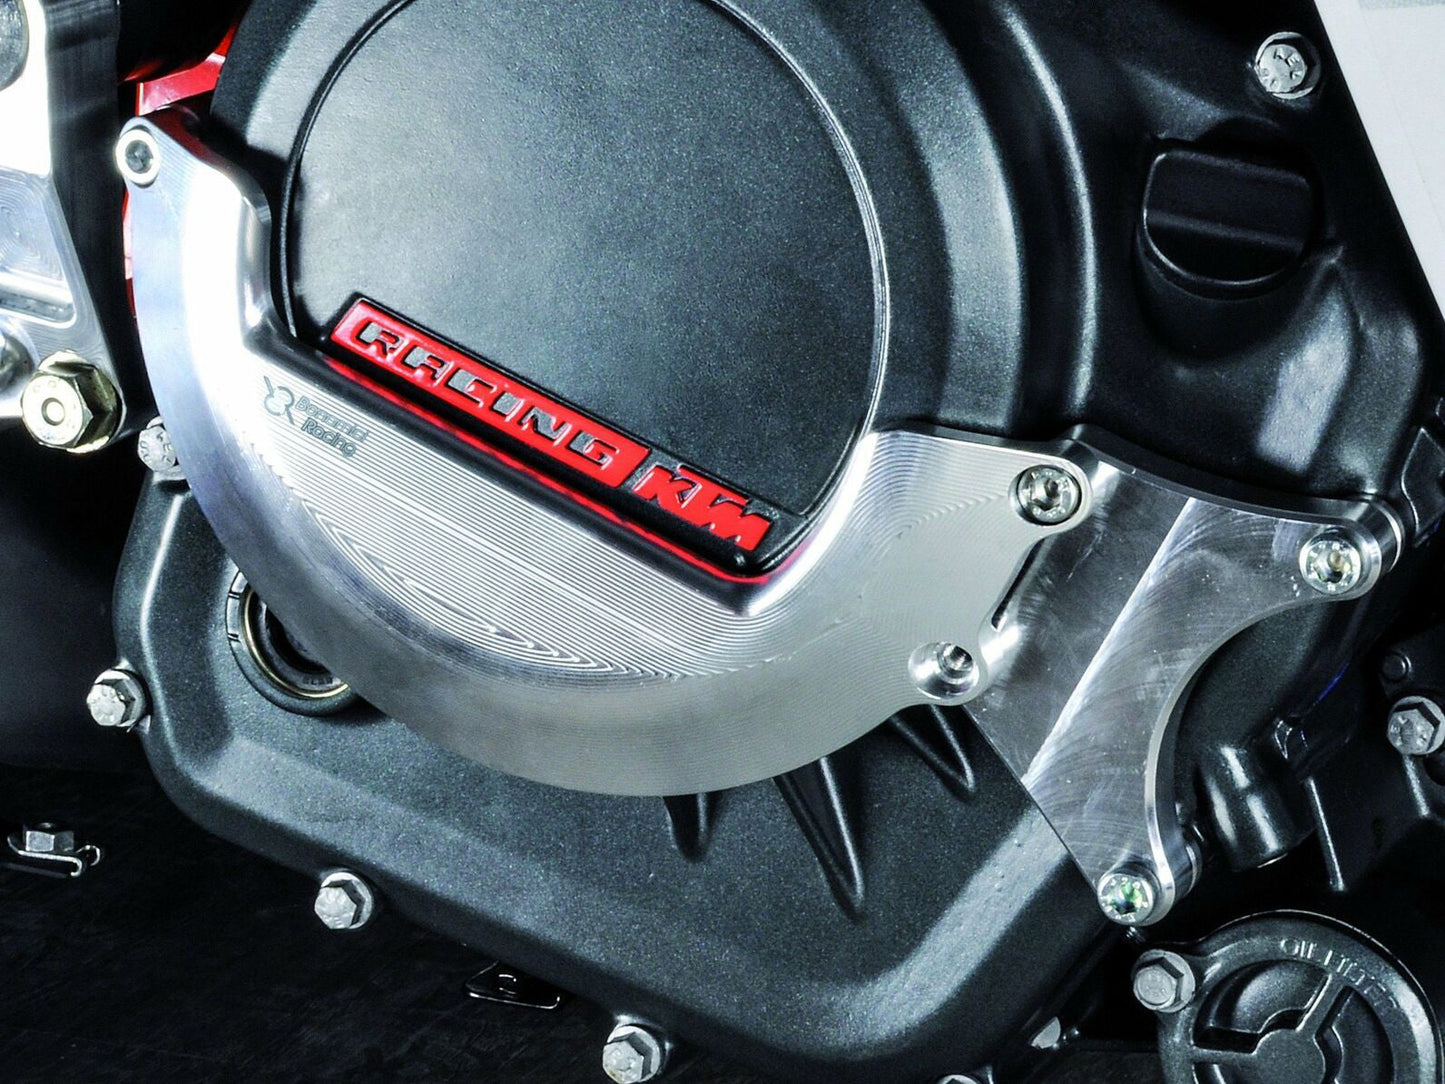 CP087 - BONAMICI RACING KTM 390 Duke / RC Engine Case Cover (right side)